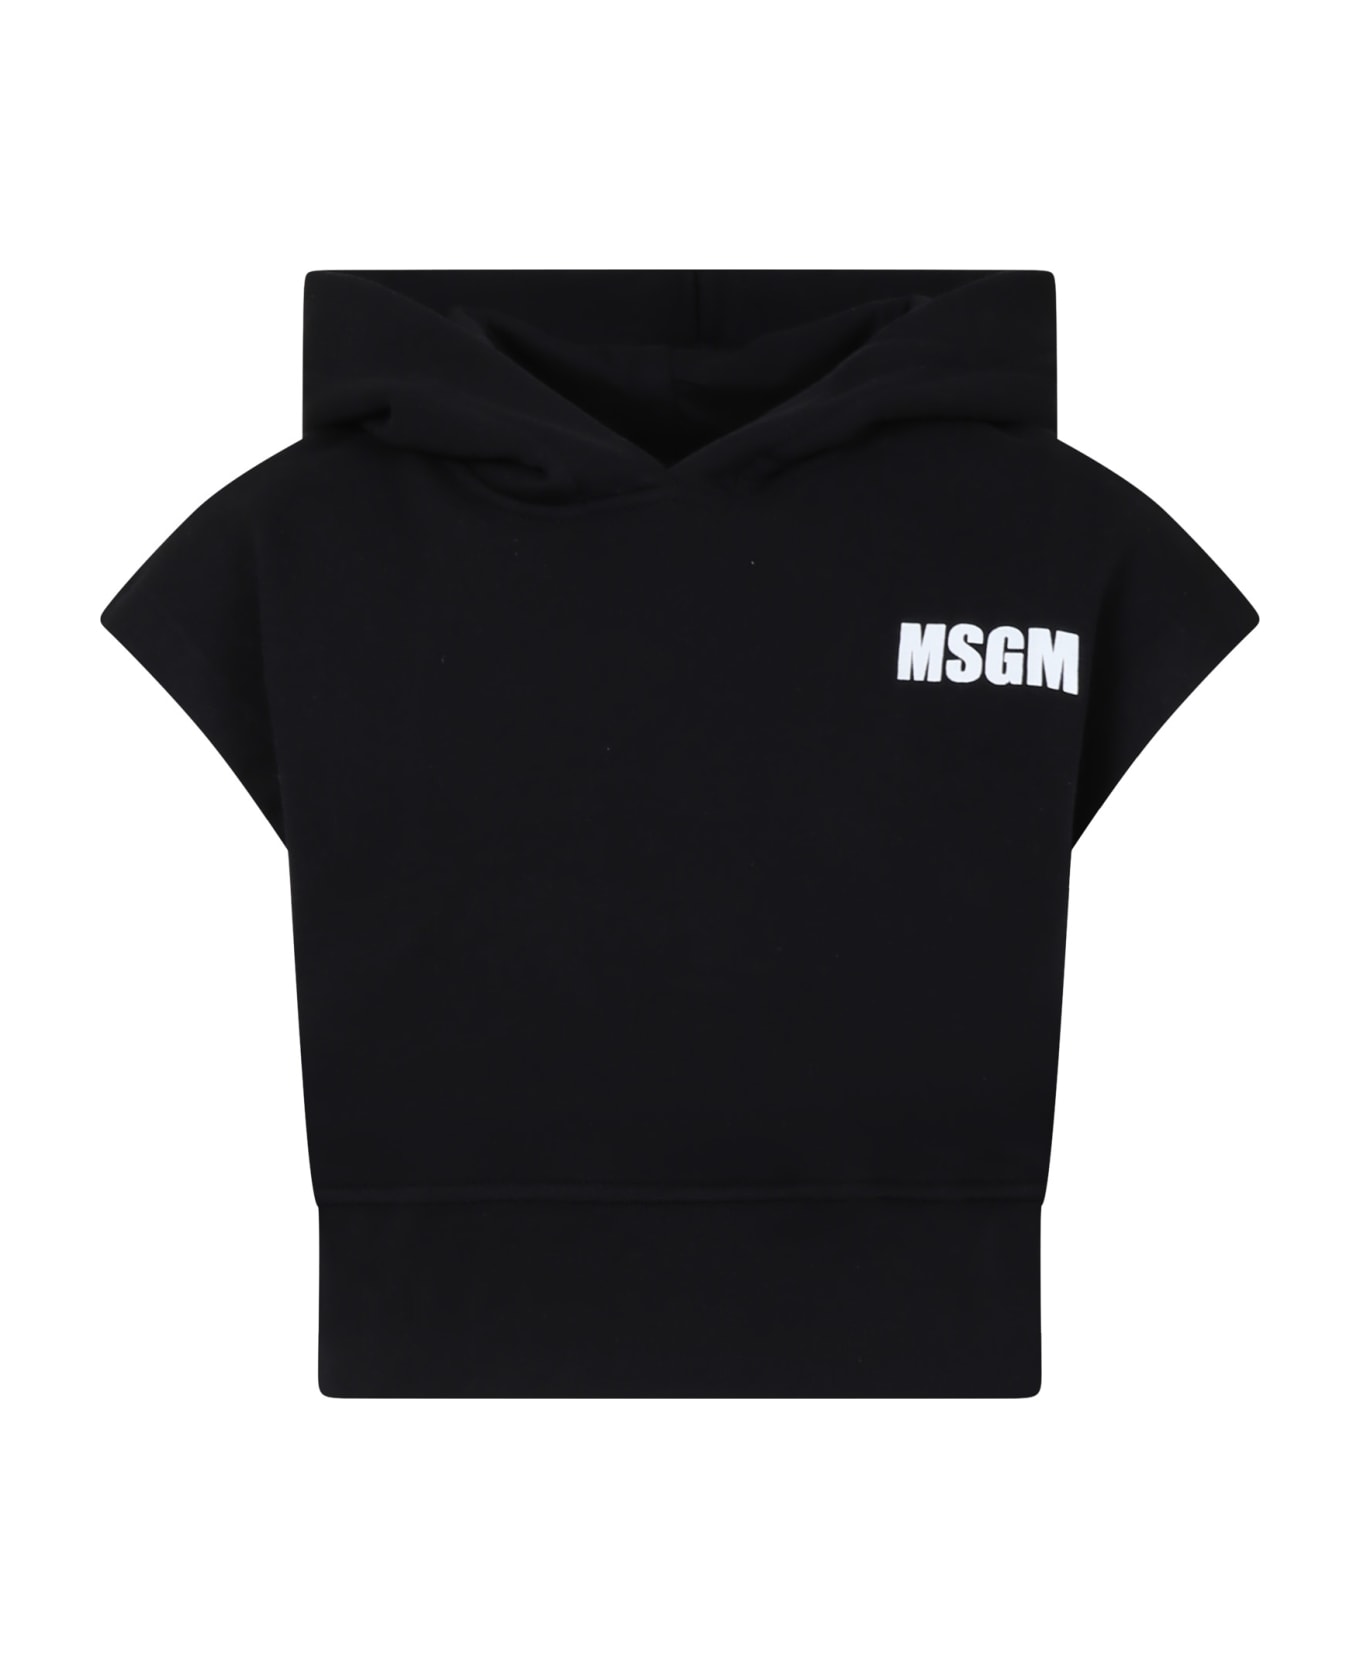 MSGM Black Sweatshirt For Girl With Logo And Writing - Black